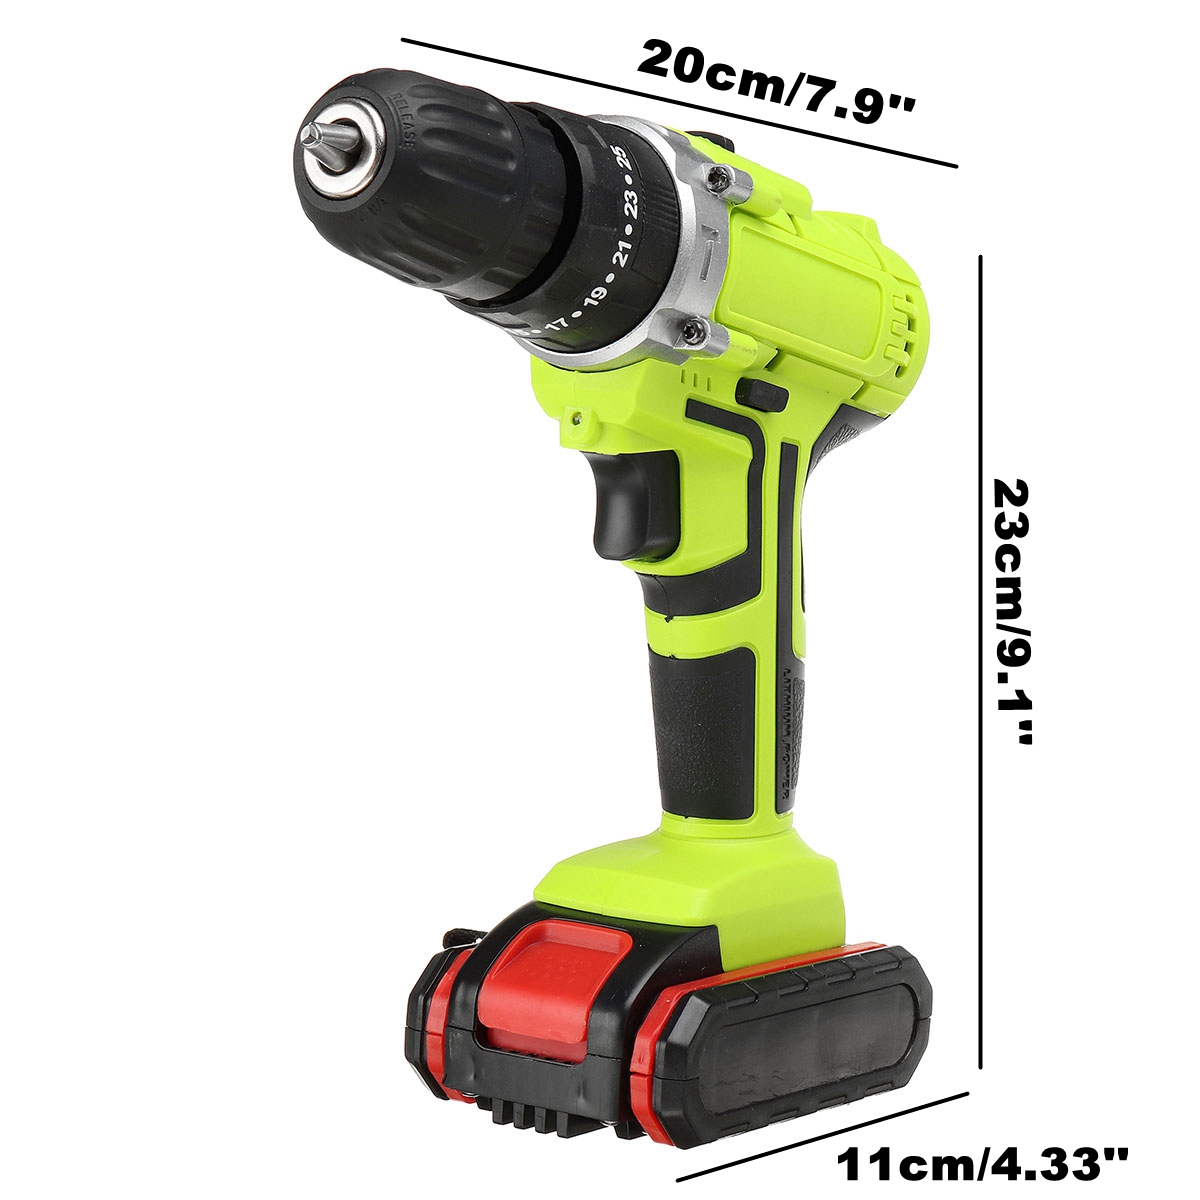 48VF-22800mAh-Cordless-Rechargable-3-In-1-Power-Drills-Impact-Electric-Drill-Driver-With-1Pcs-Batter-1877434-10